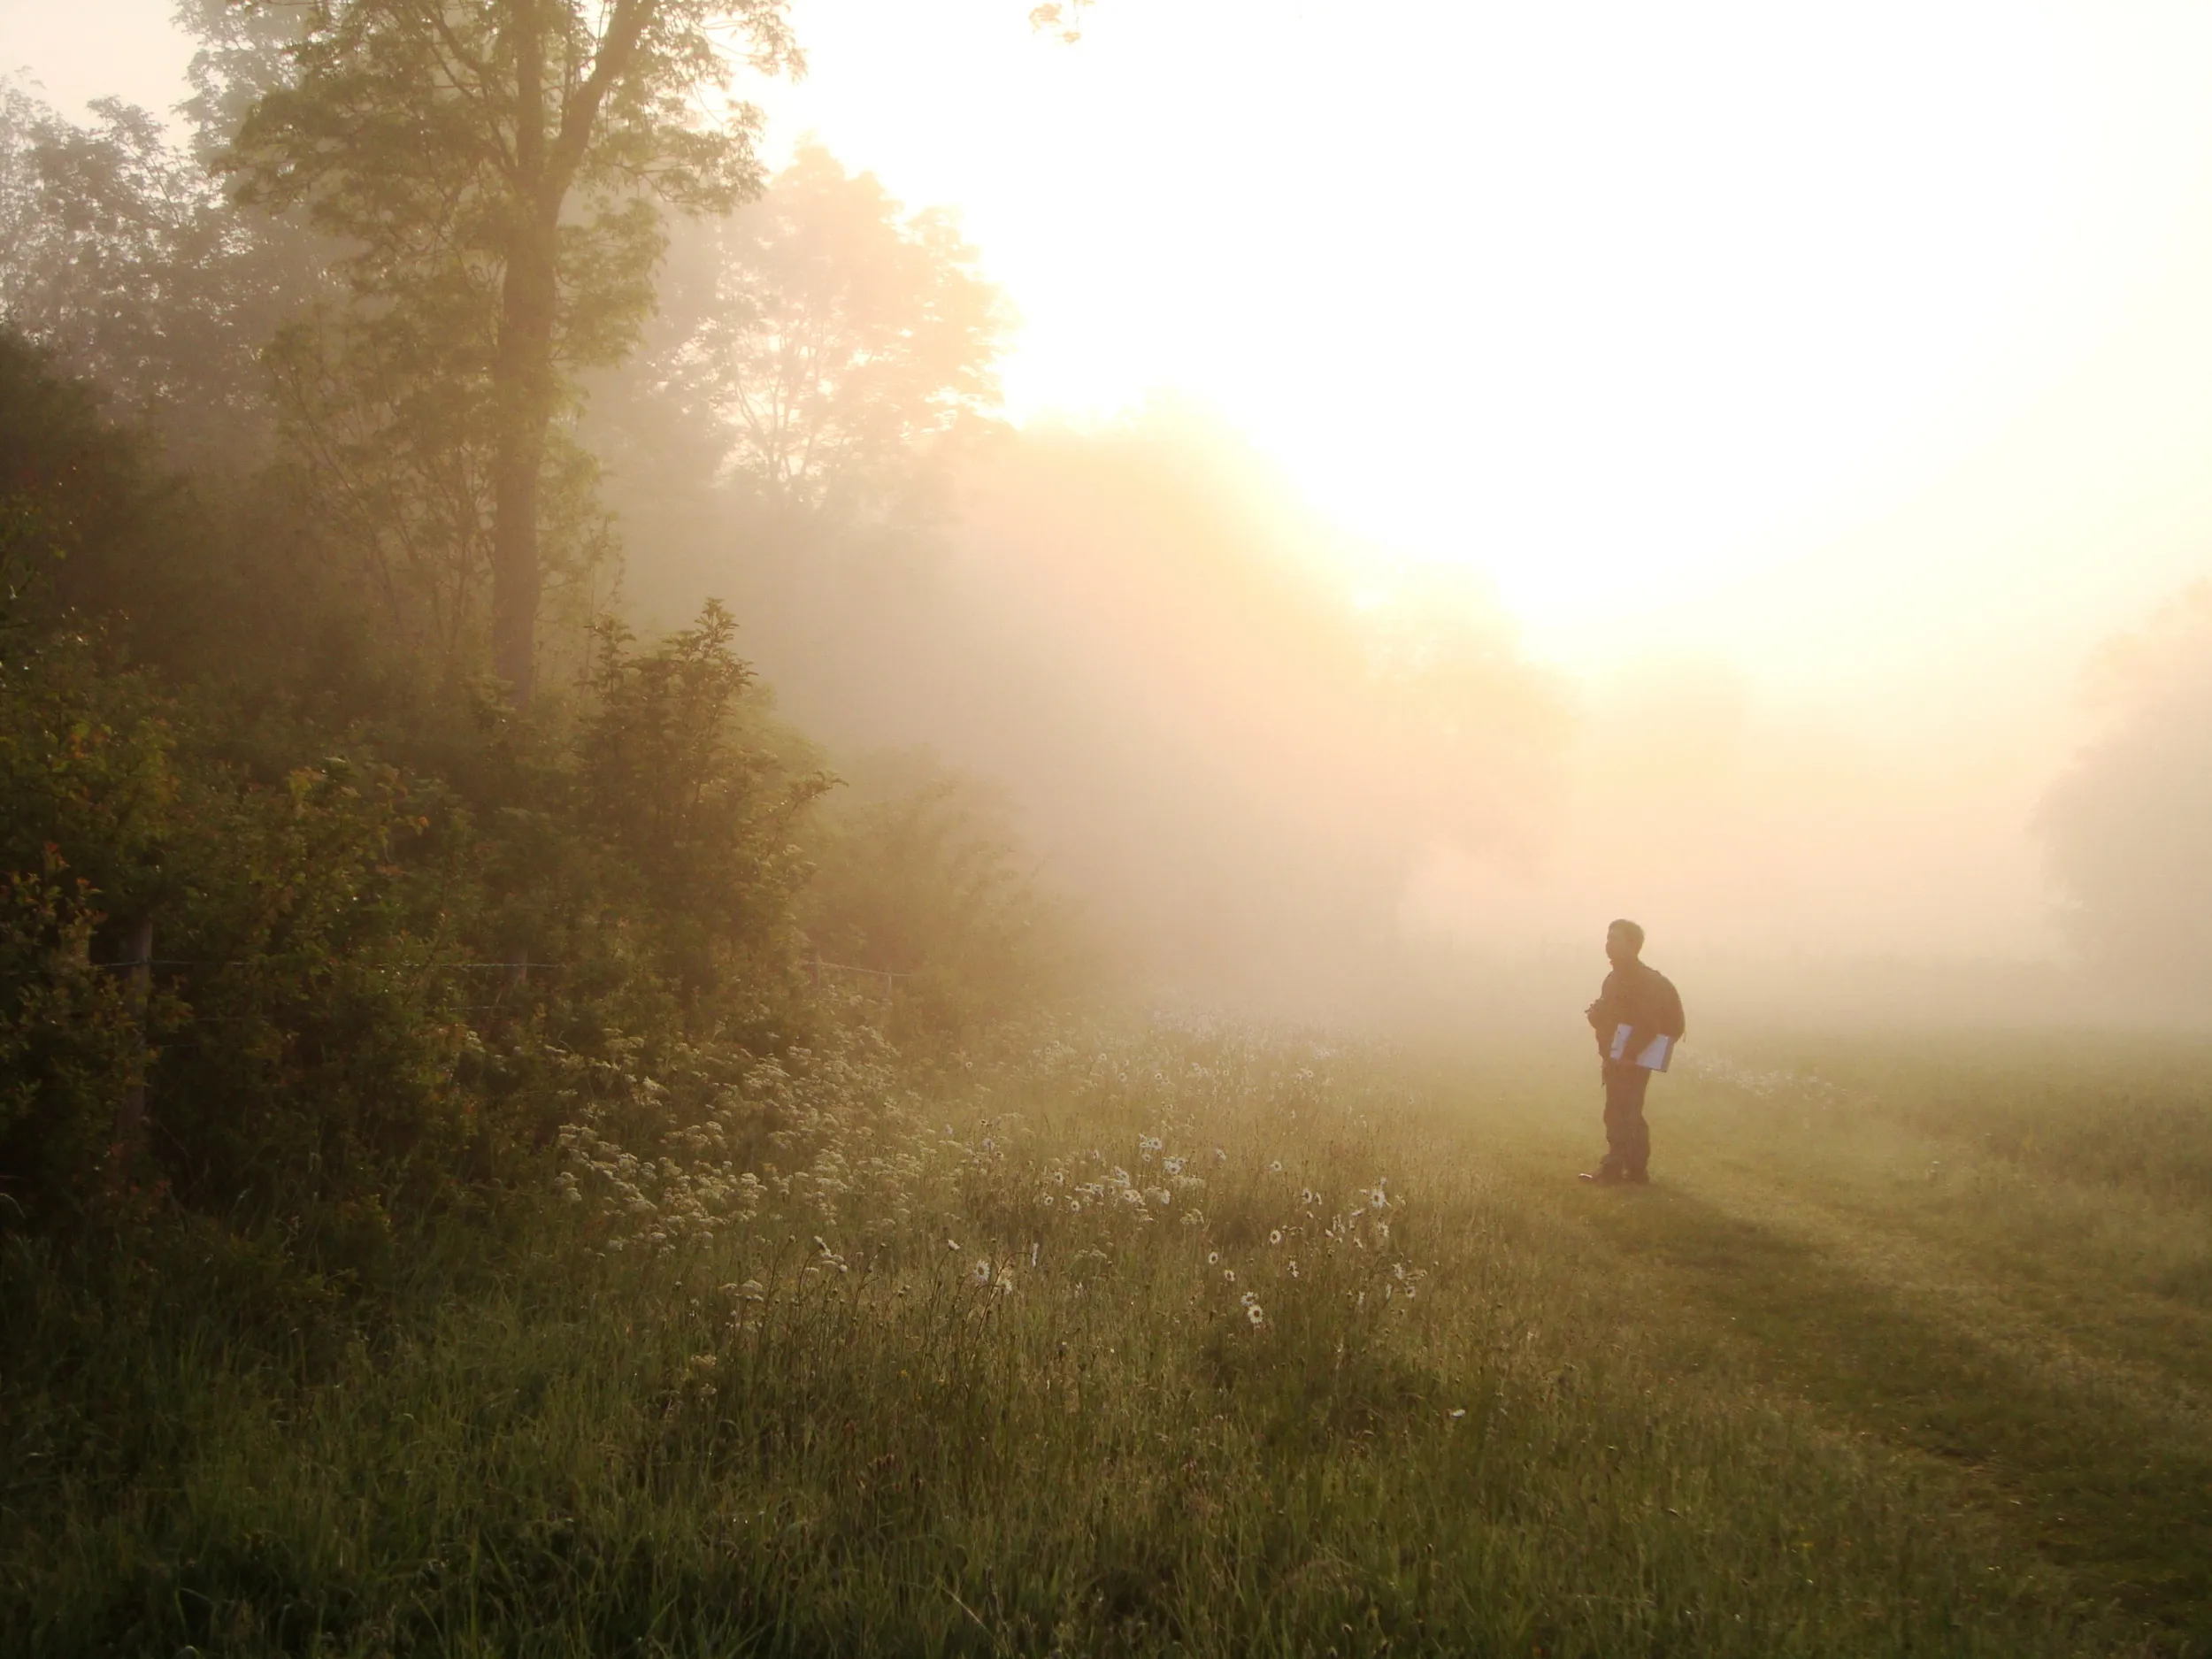 A person walking near trees on a misty dawn morning. 